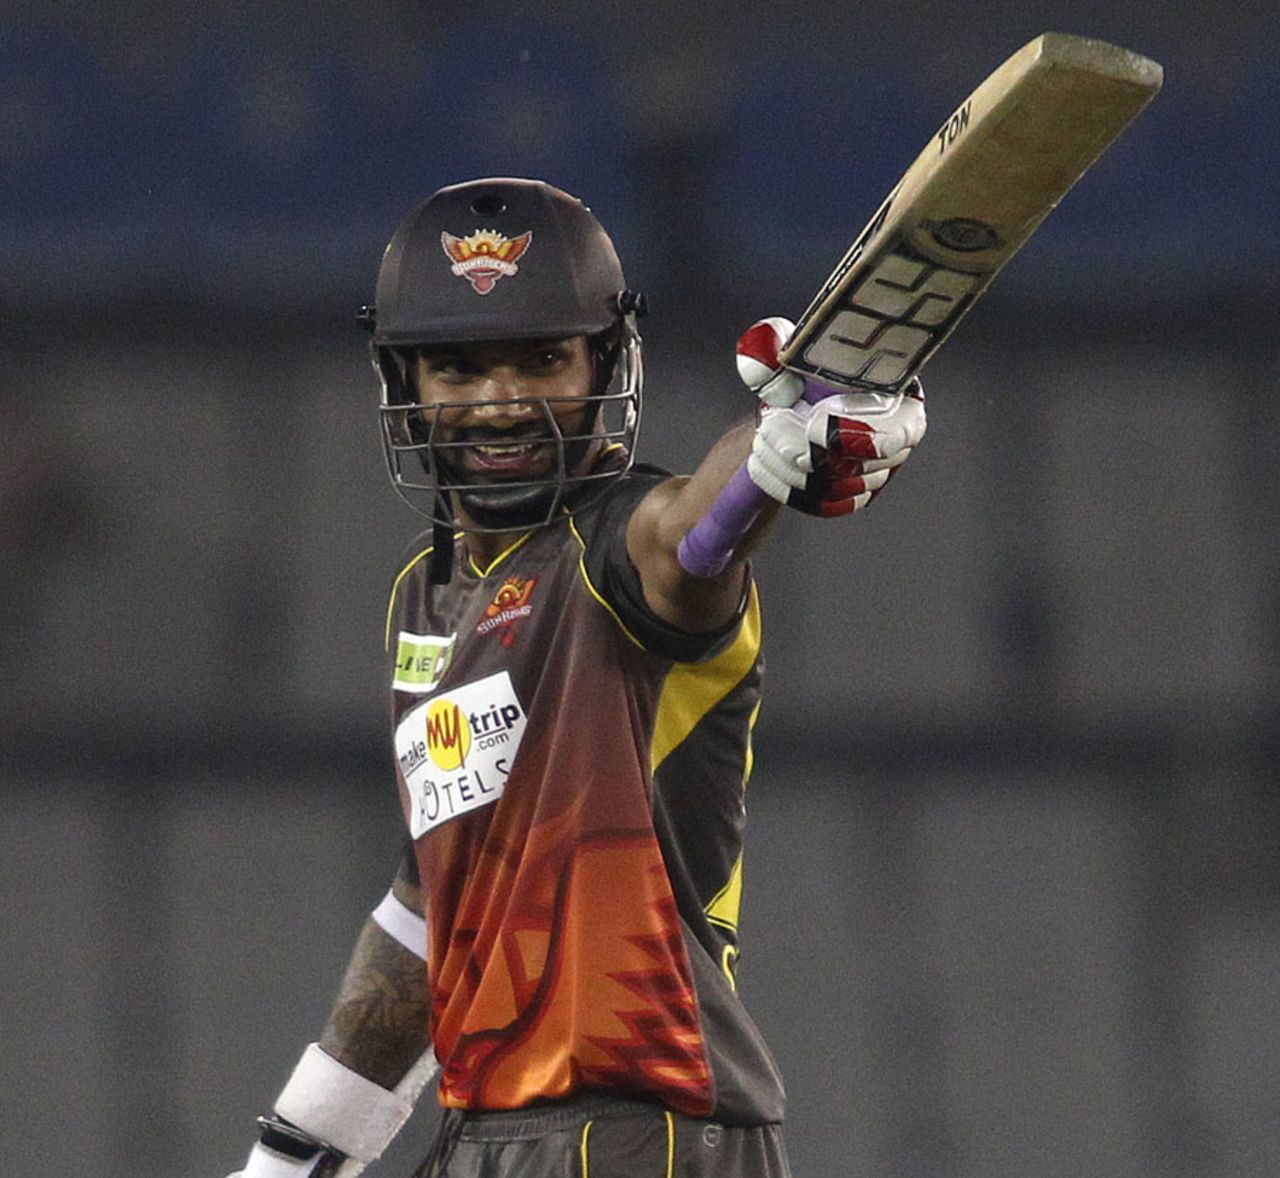 Shikhar Dhawan raises the bat after reaching his fifty, Faisalabad Wolves v Sunrisers Hyderabad, Champions League Qualifiers, Mohali, September 18, 2013